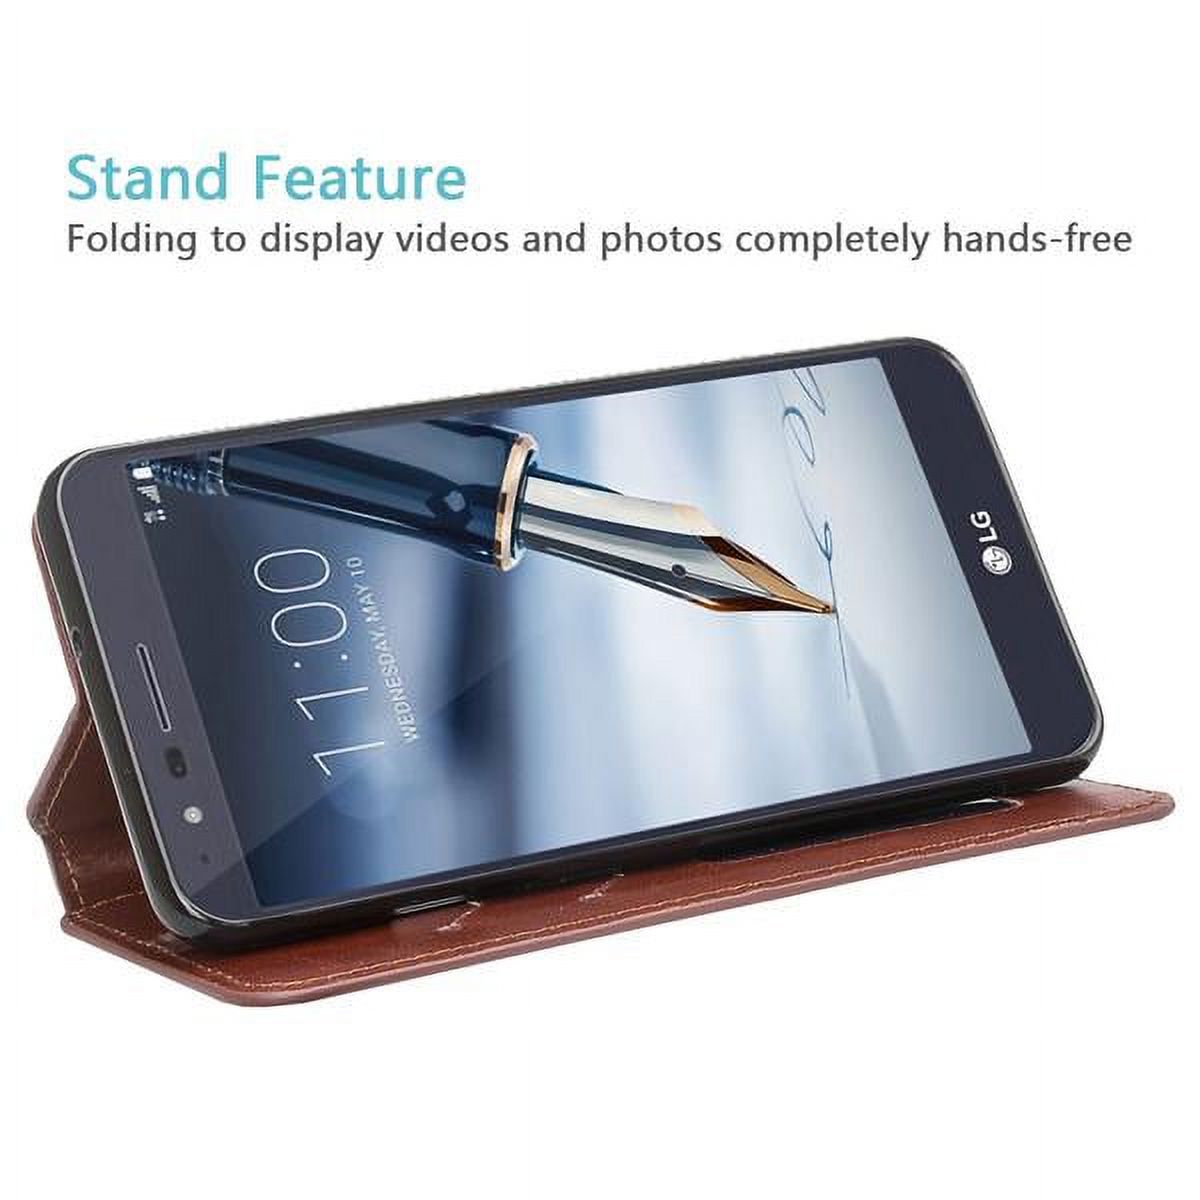 LG Stylo4 Case, LG Stylus4 Case, Slim Folio [Kickstand] Pu Leather Wallet Case Phone Case for LG Stylo4 - Brown - image 4 of 6